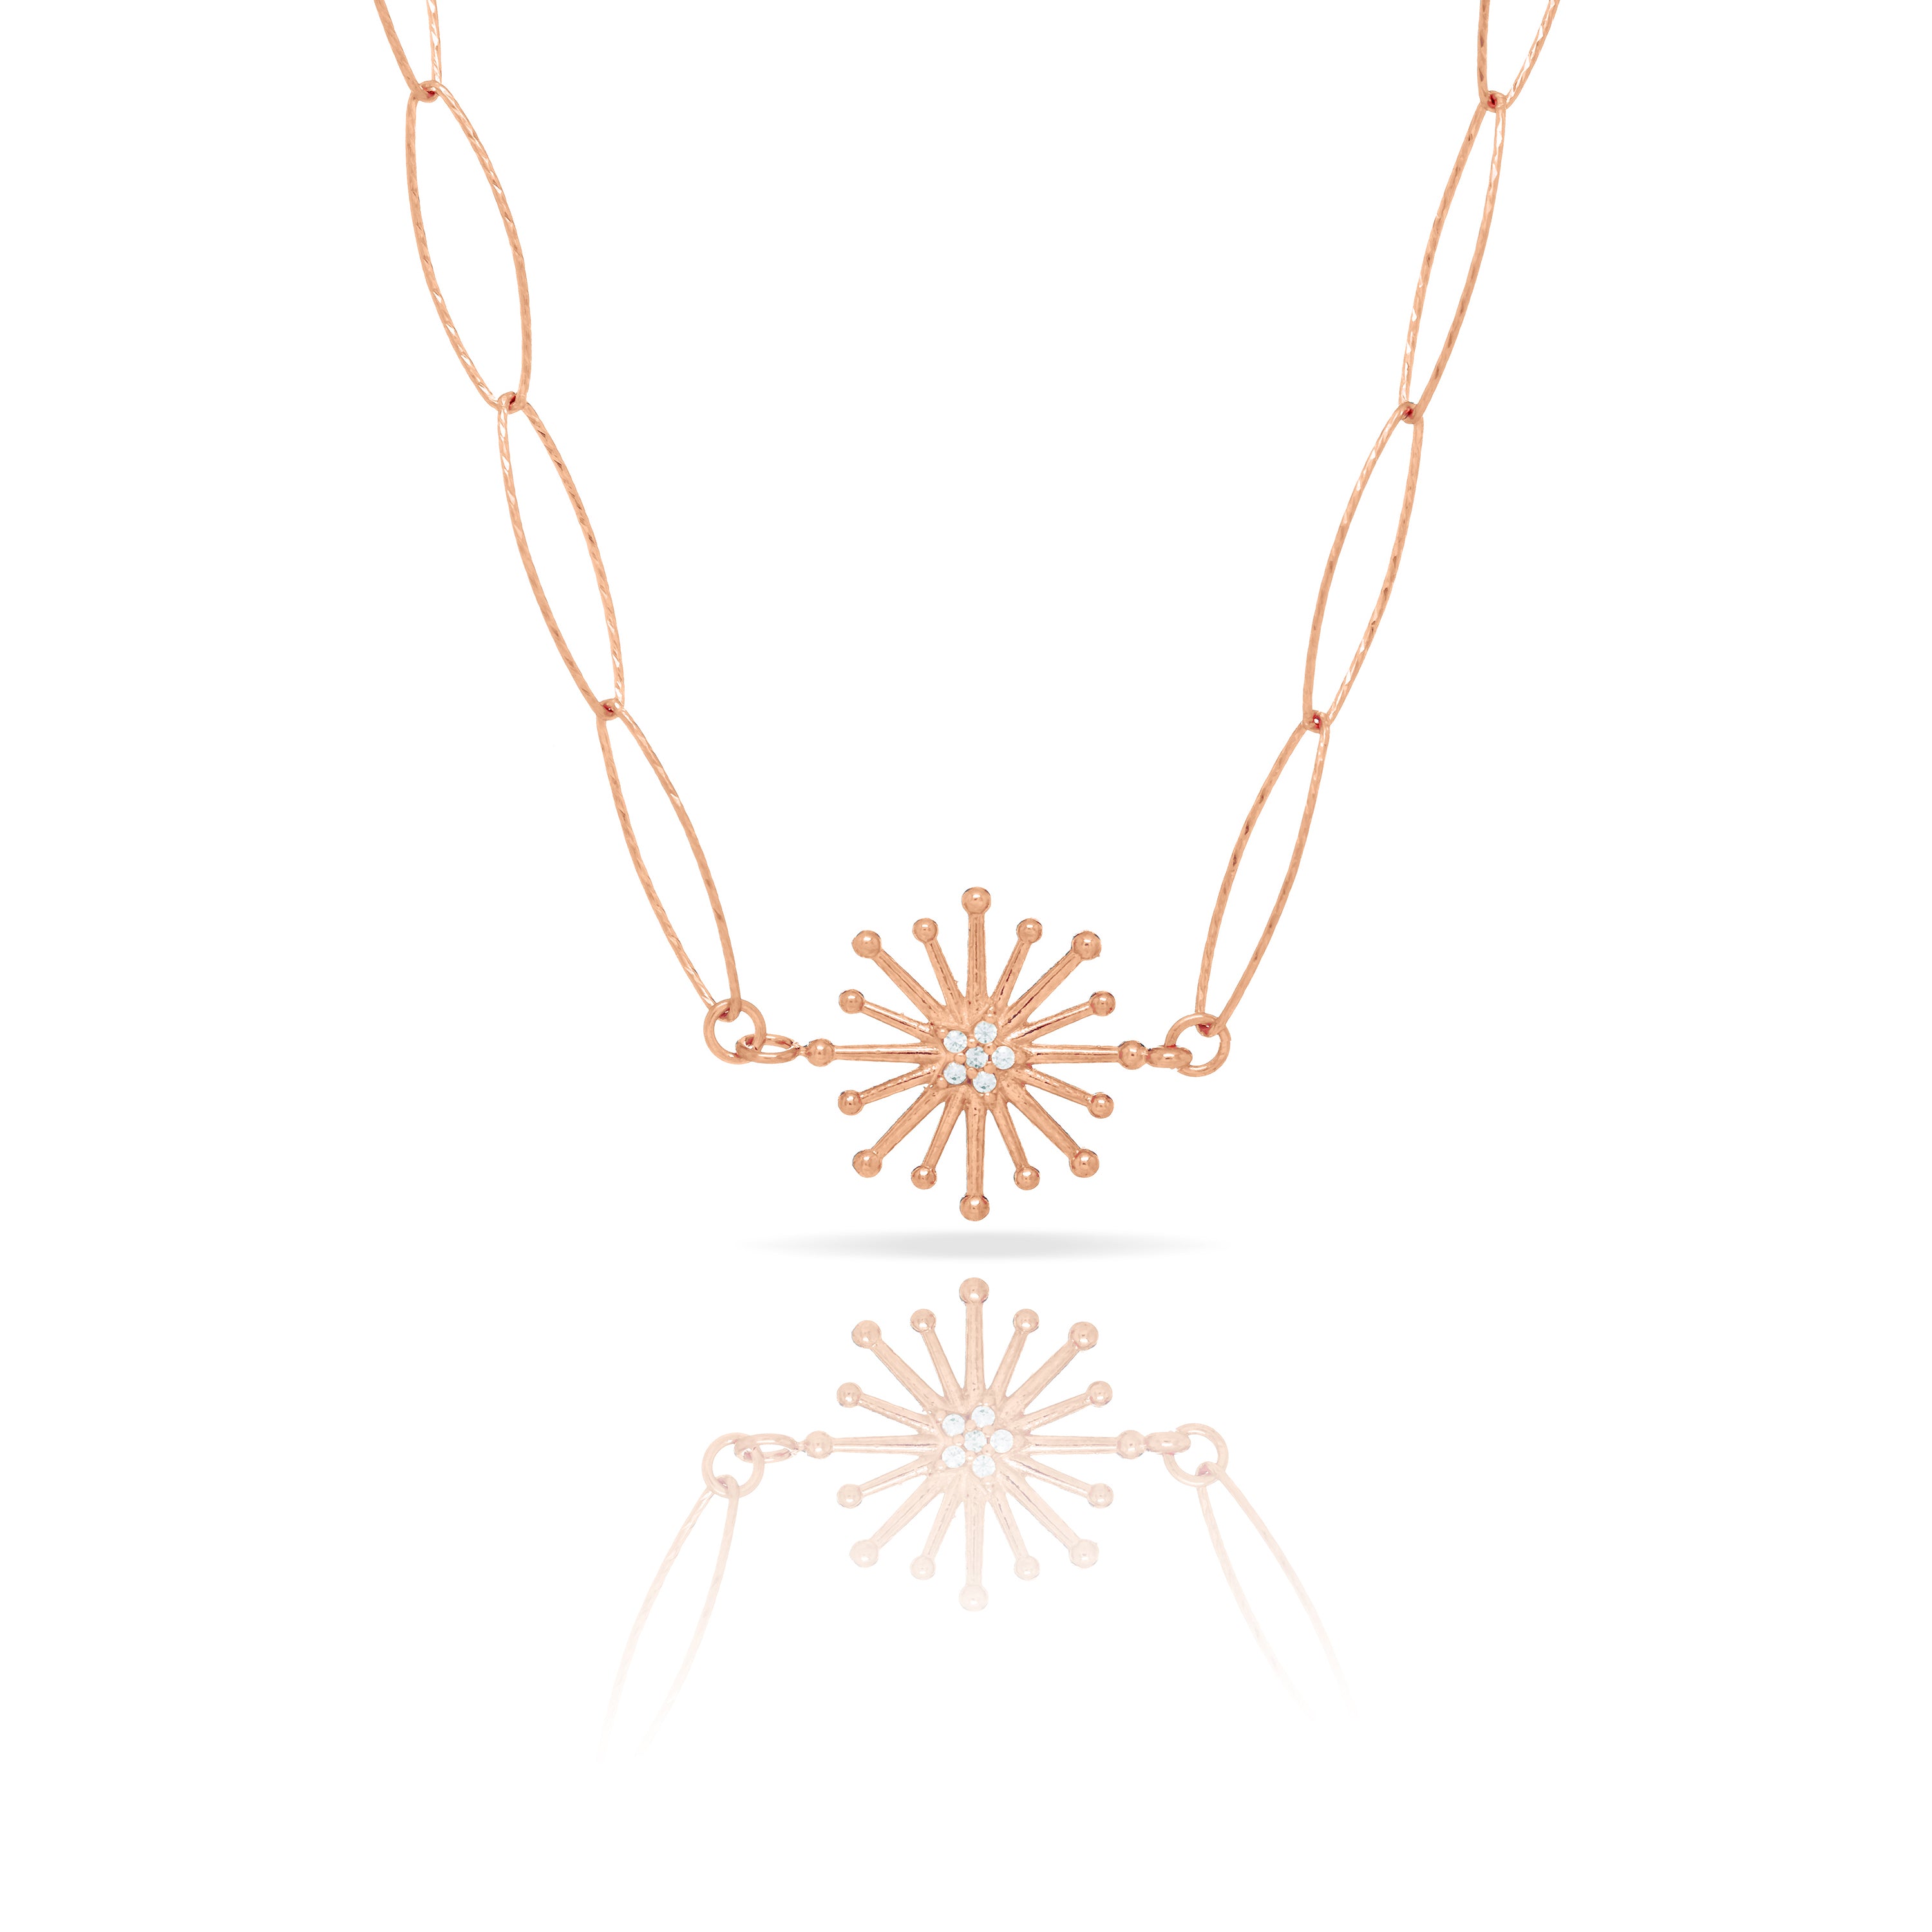 Starburst Oval Chain Necklace